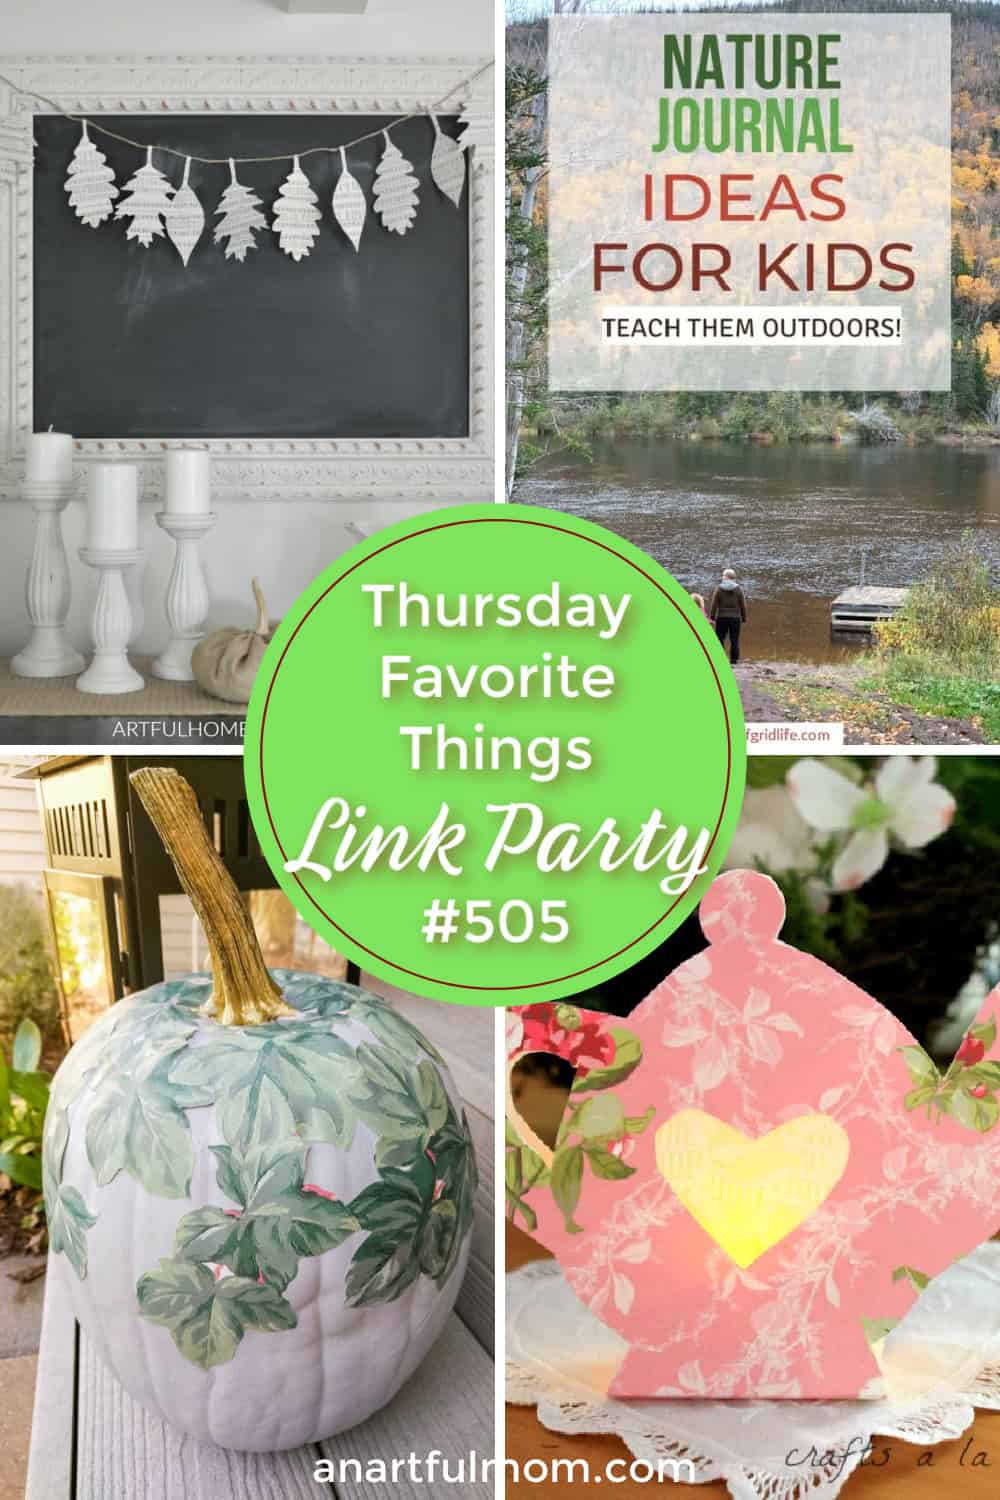 Thursday Favorite Things Link Party #505